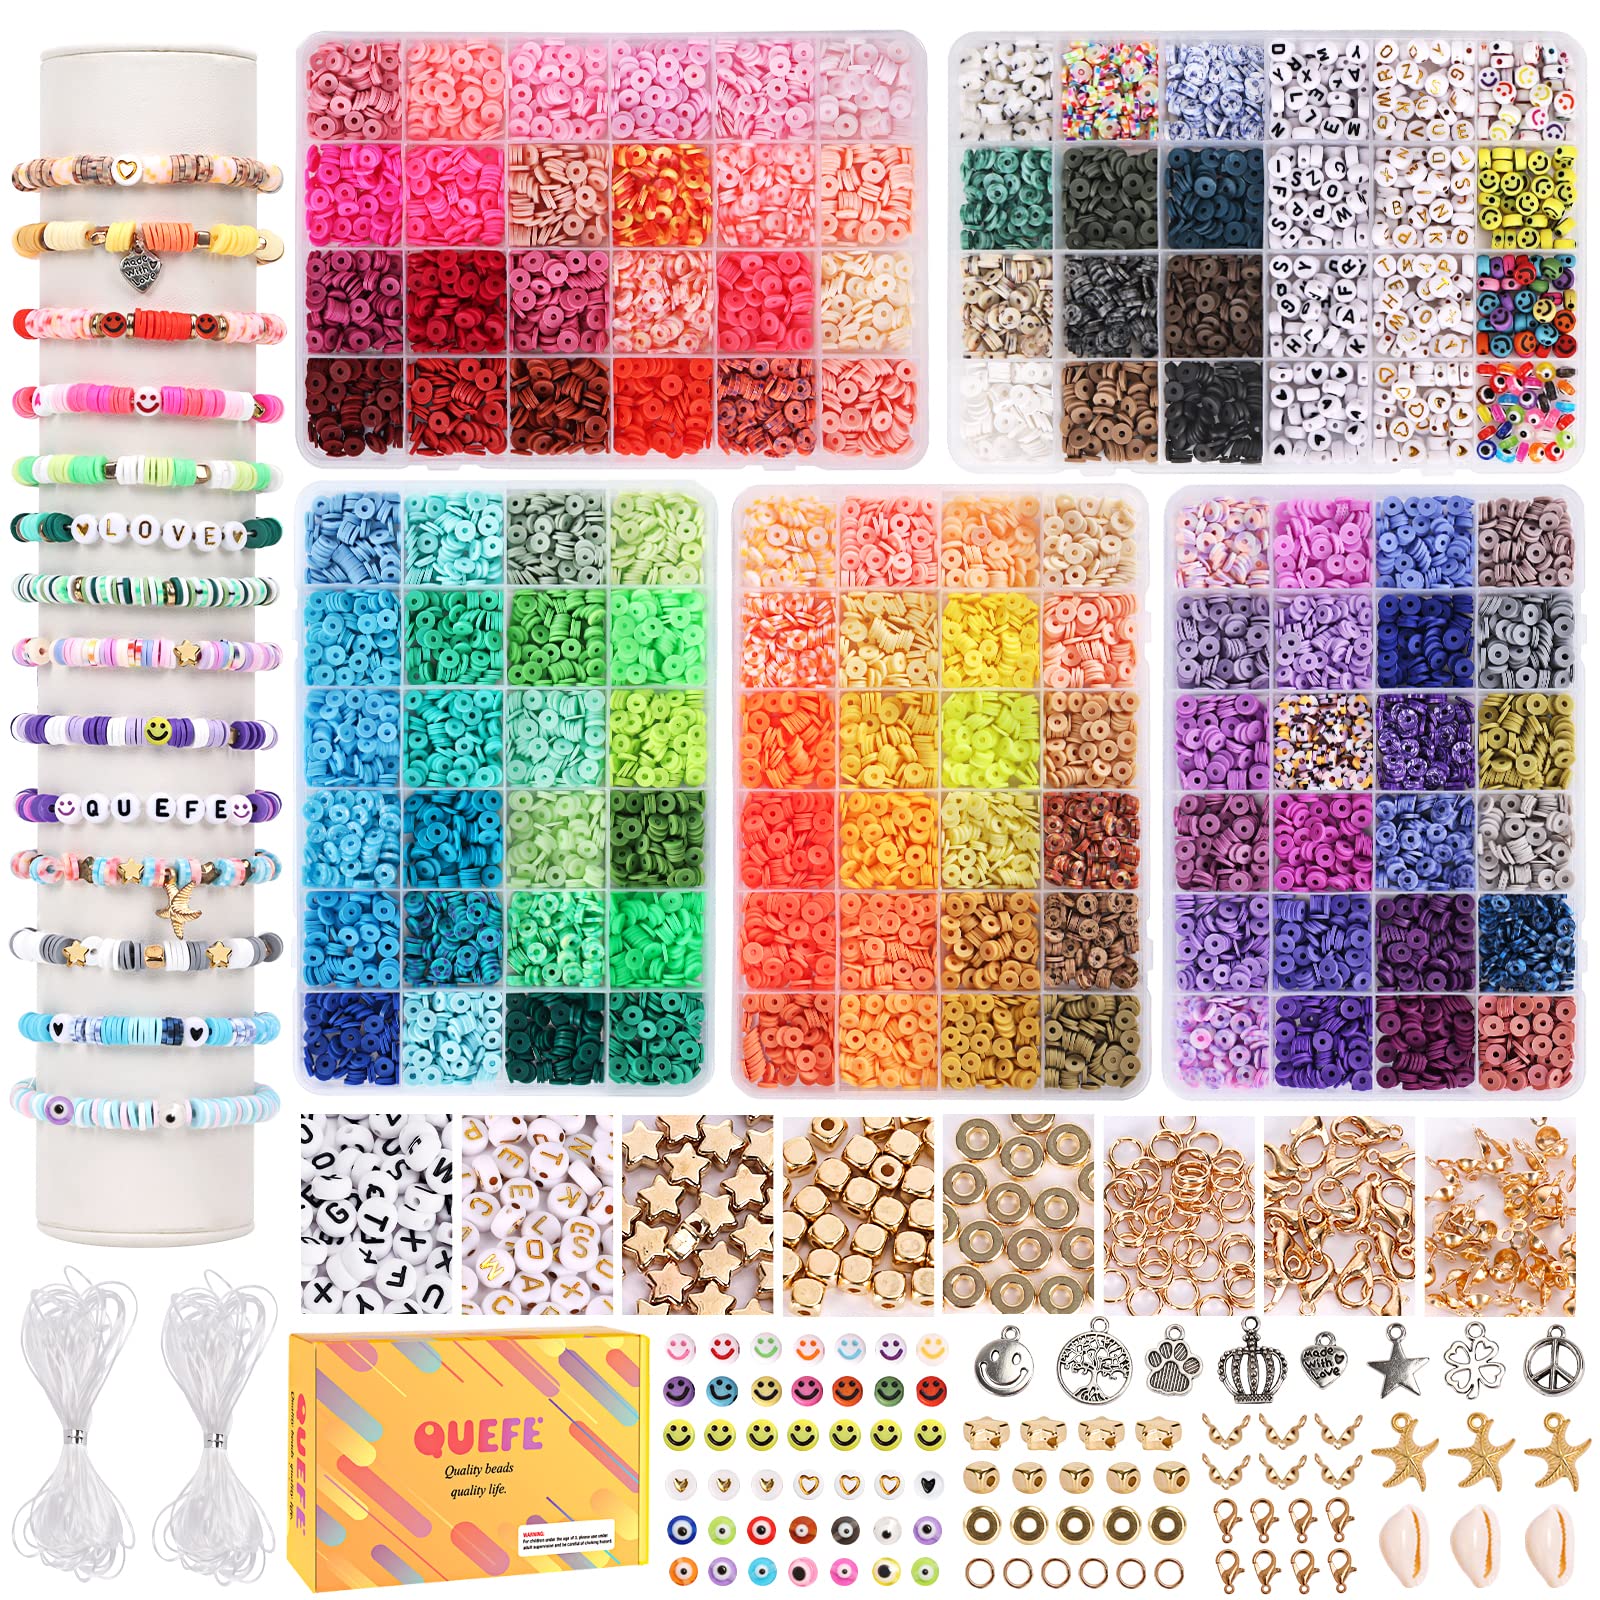 Lot of 9 Bags of Small Plastic Beads for Crafts, Jewelry Making Different  Colors